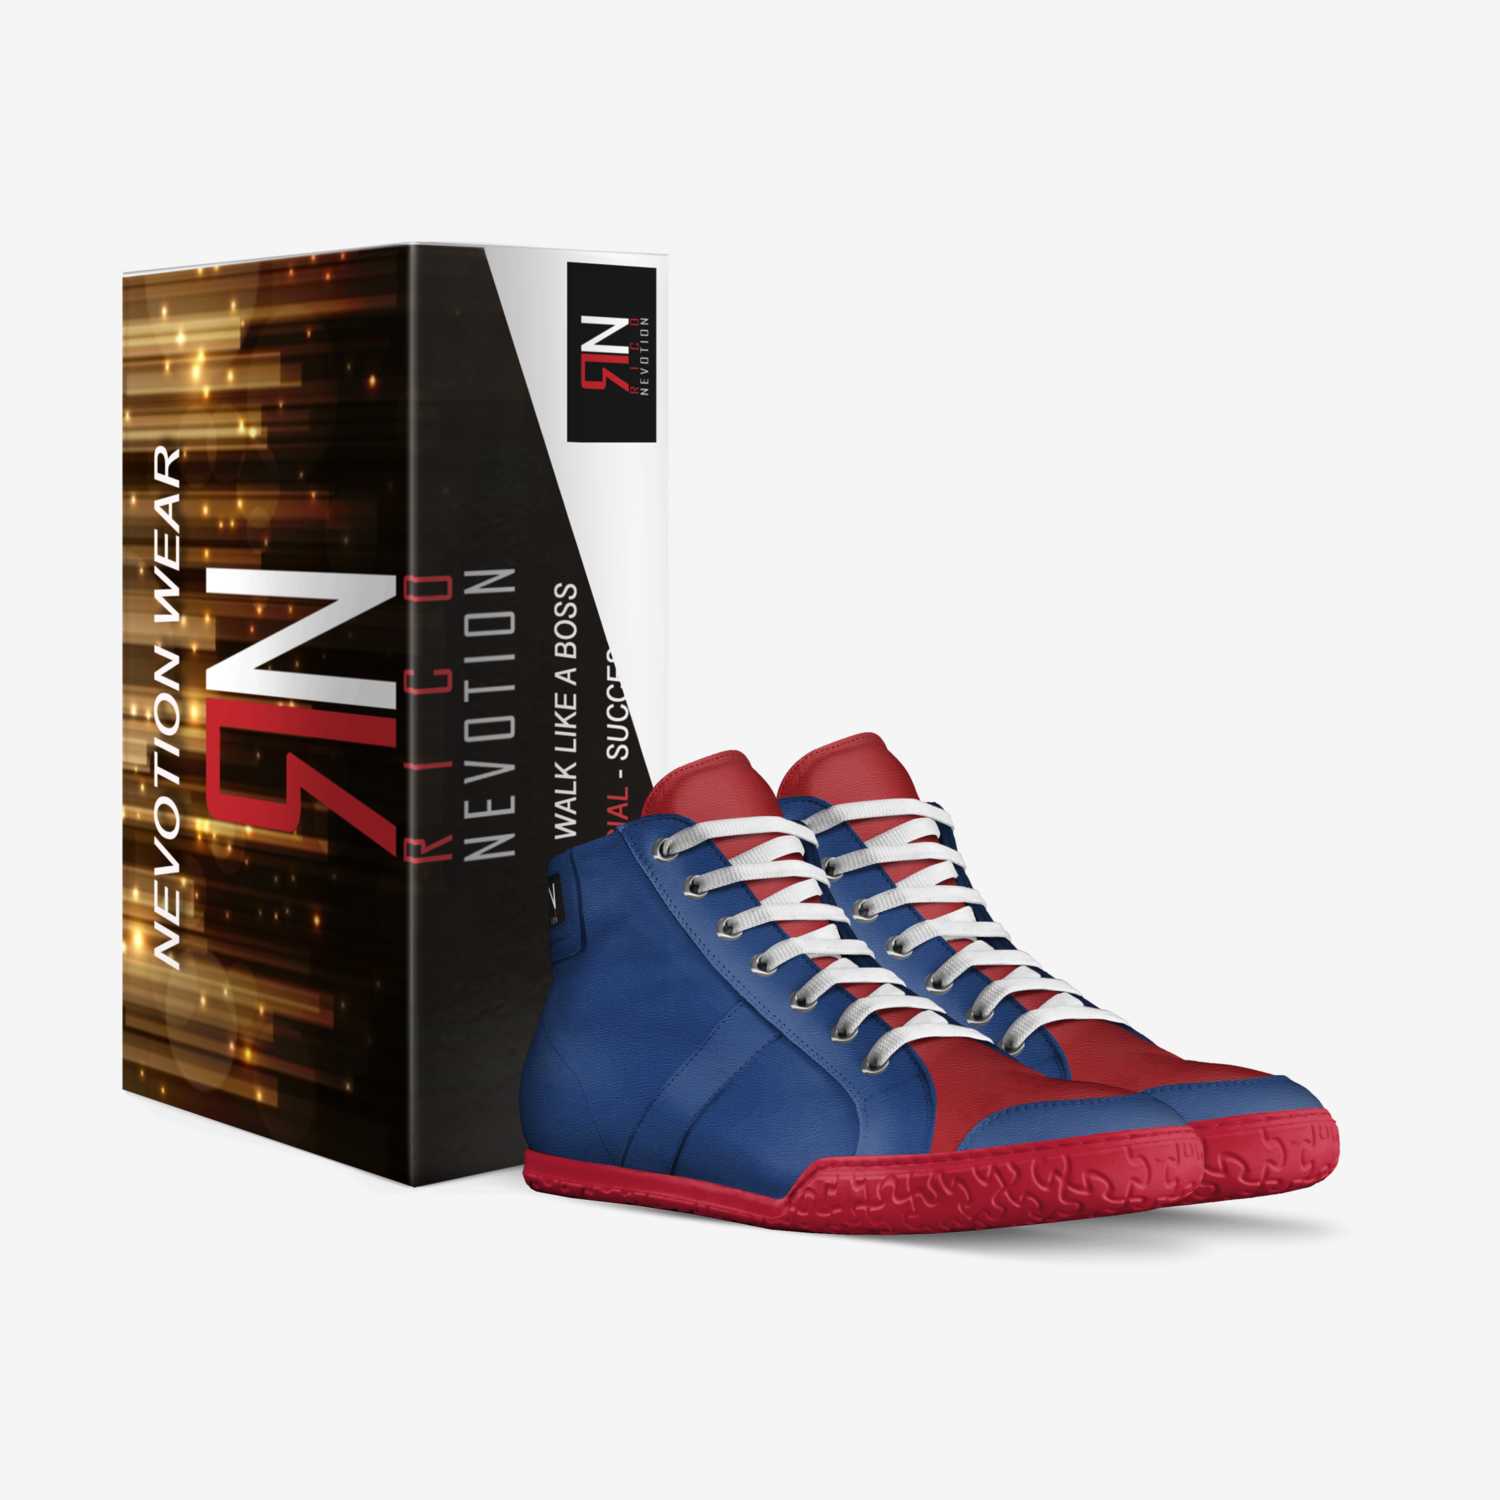 Nevotion Wear custom made in Italy shoes by Rico Nevotion | Box view